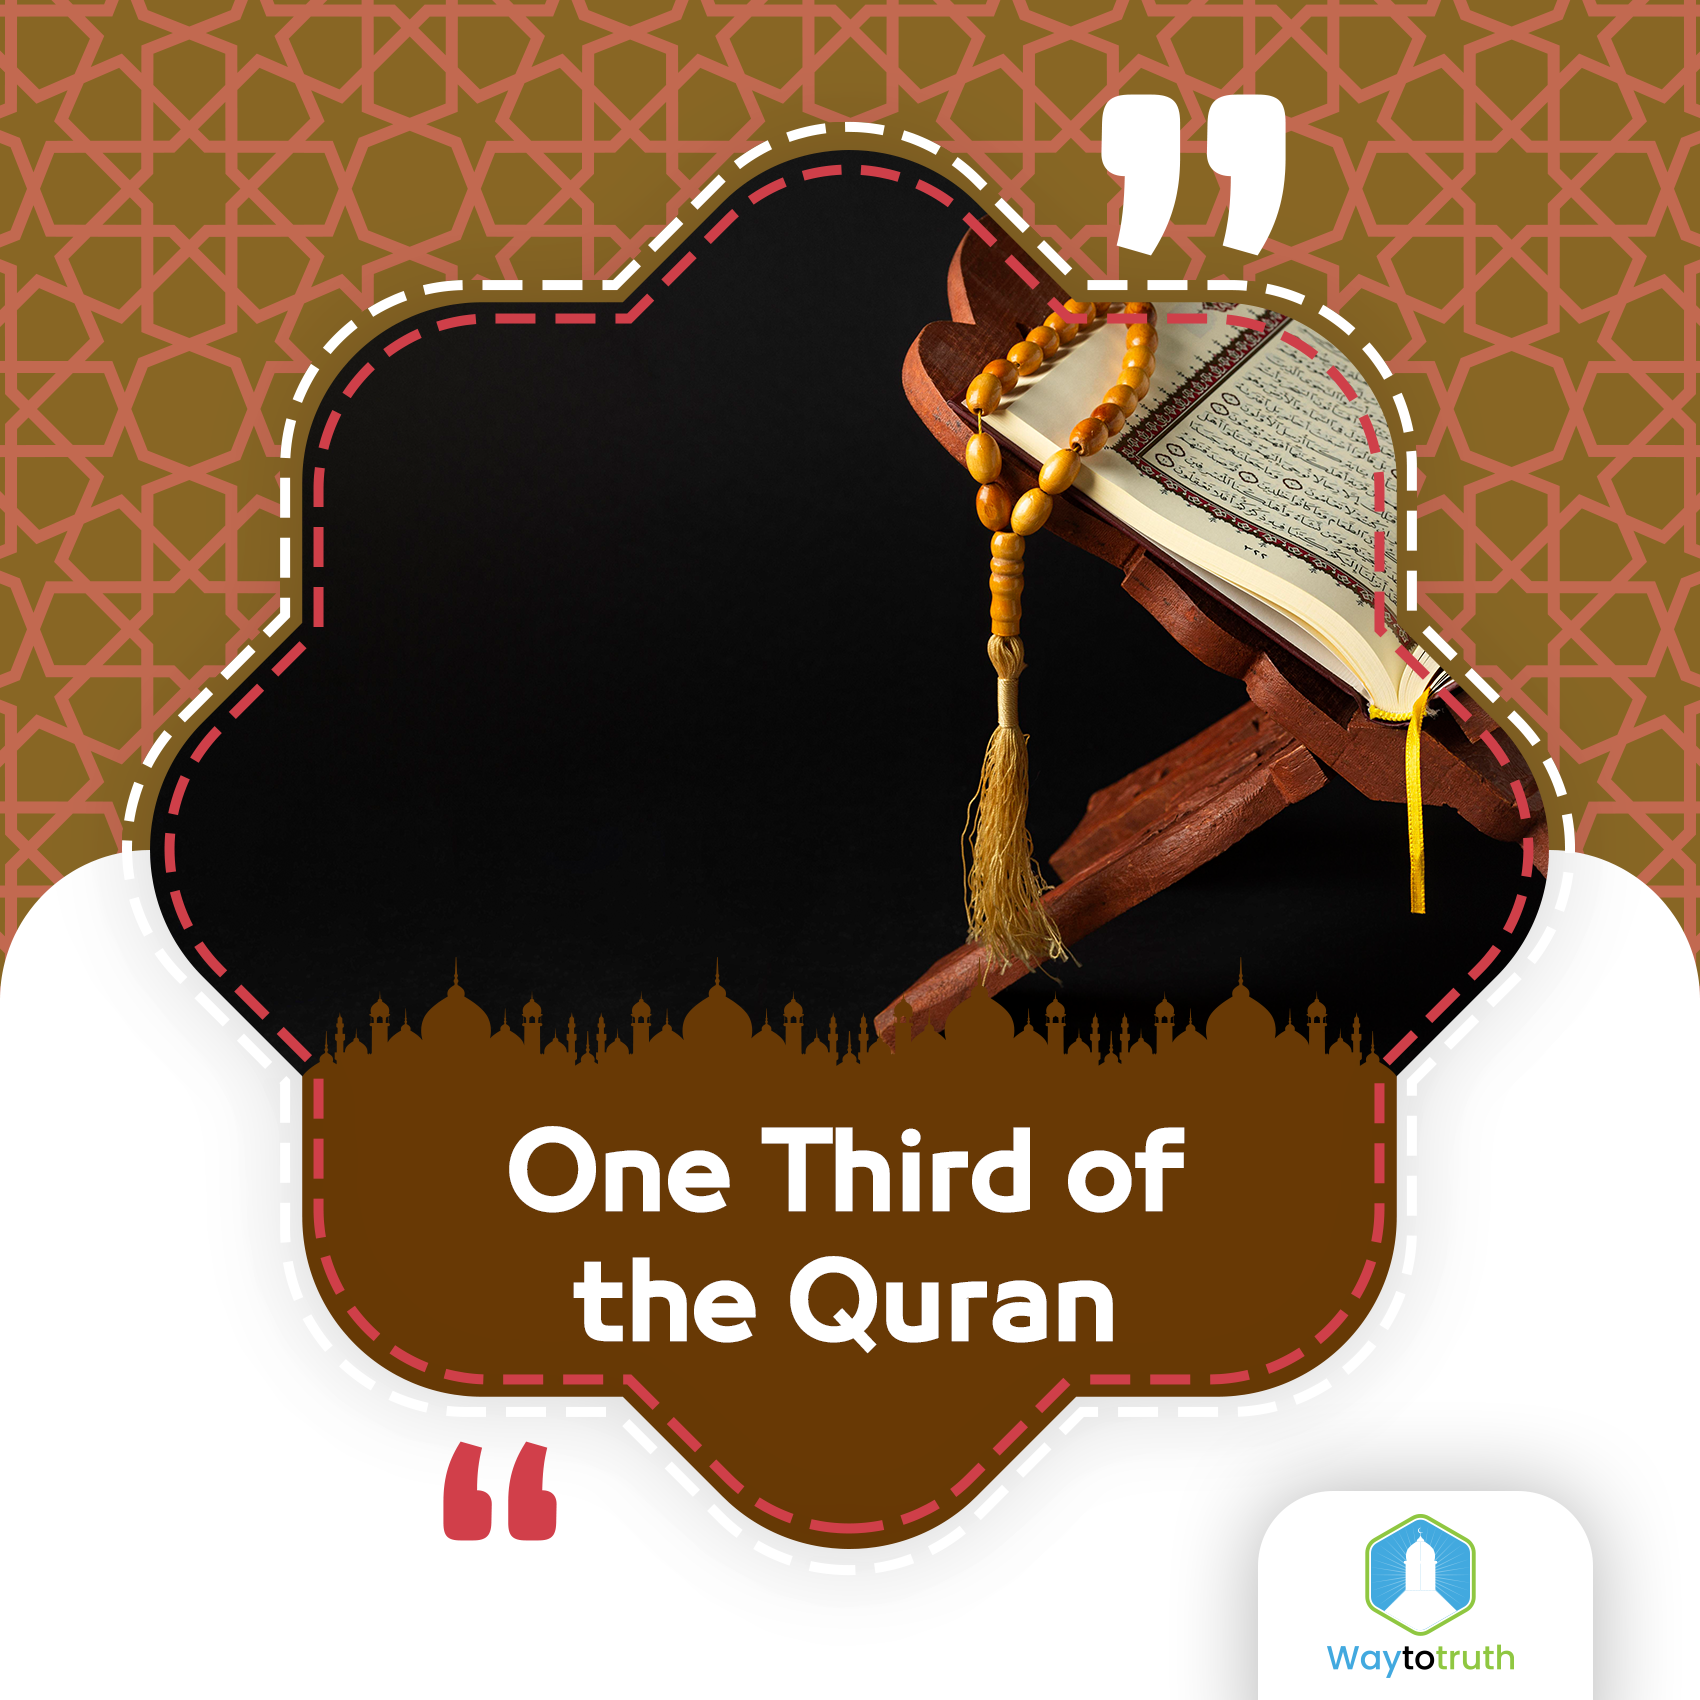 One Third of the Quran